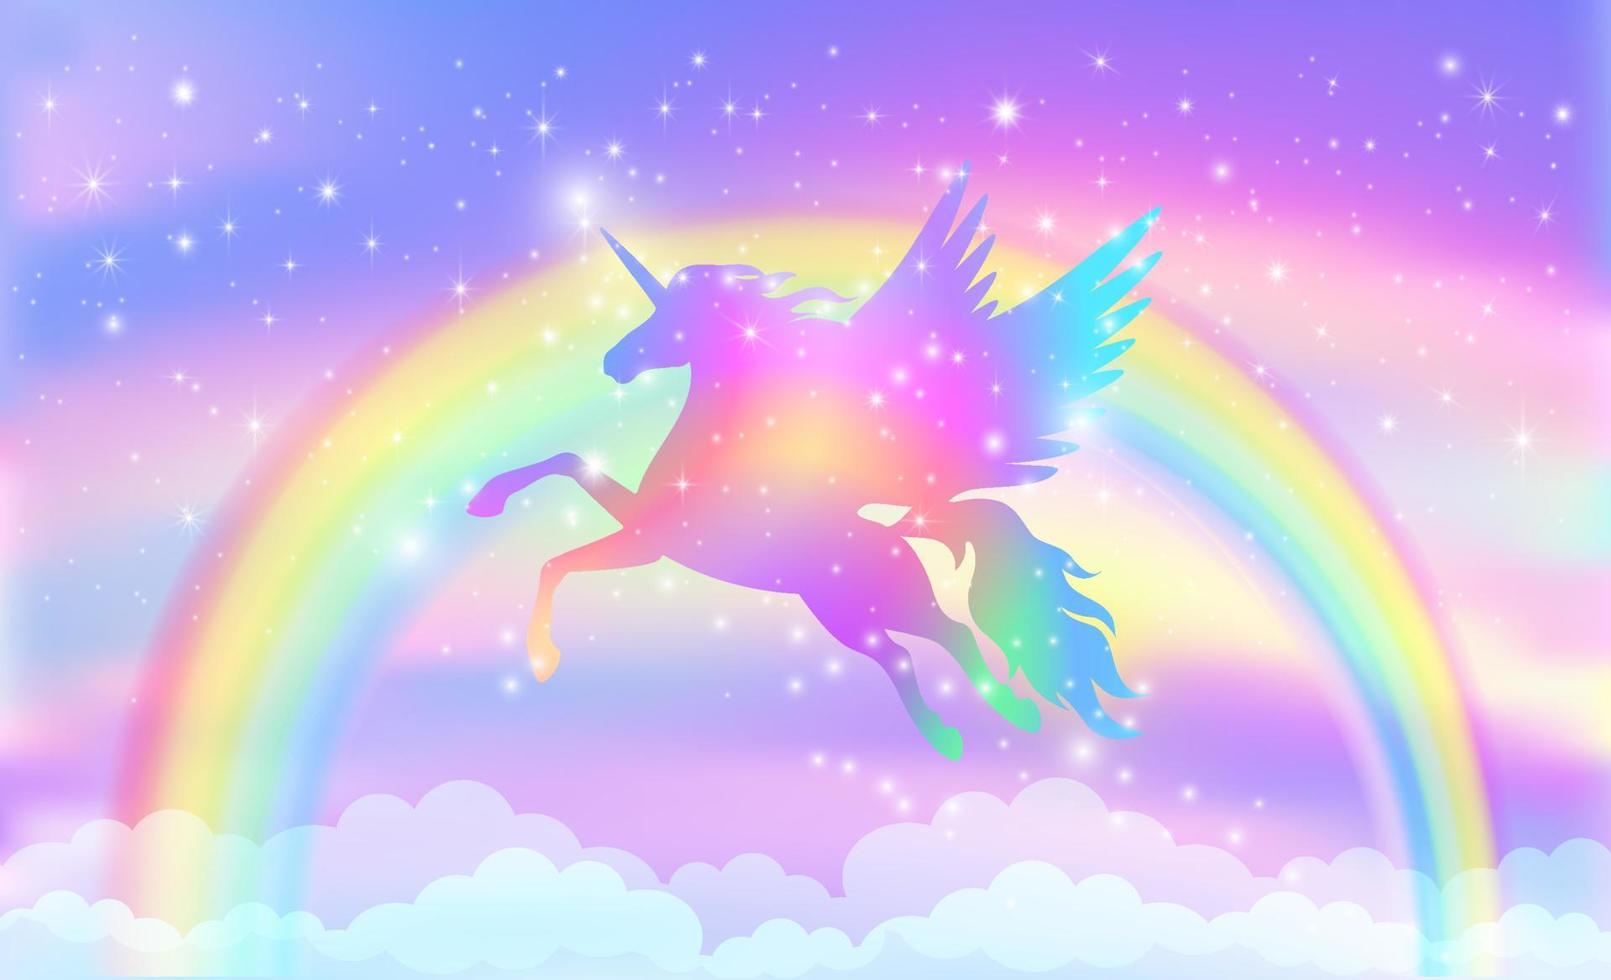 Rainbow background with winged unicorn silhouette with stars. vector